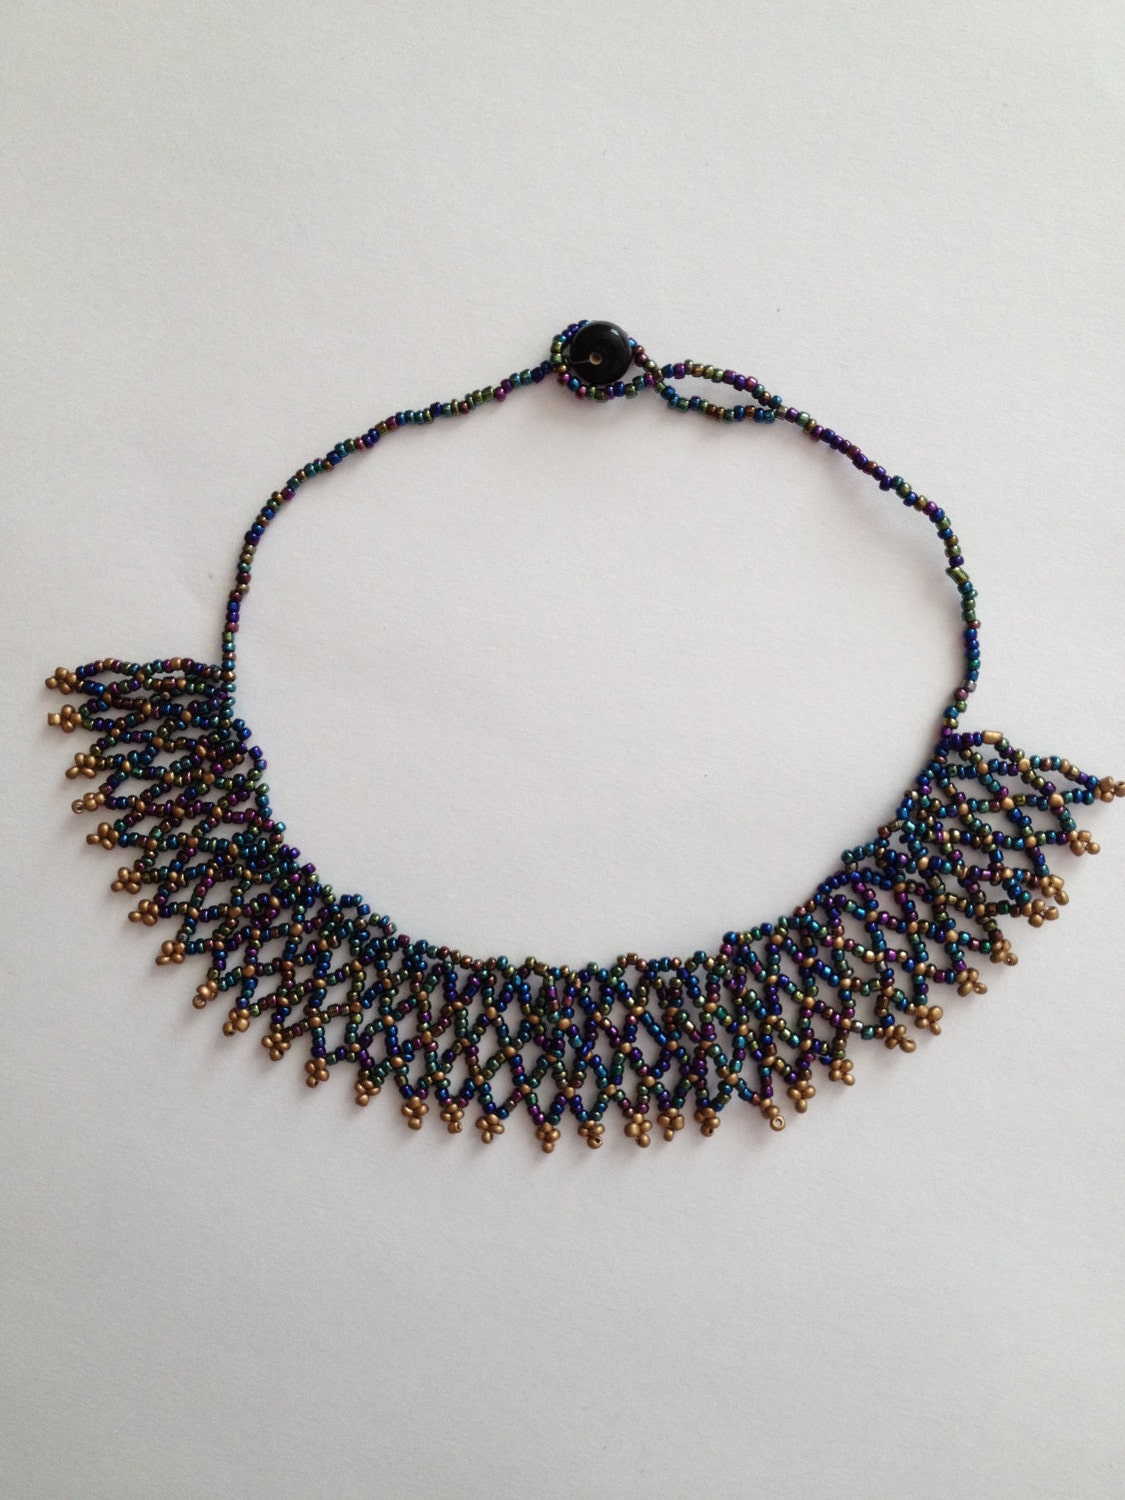 Peacock color beaded Necklace -Dark blue and gold necklace - Seed bead necklace